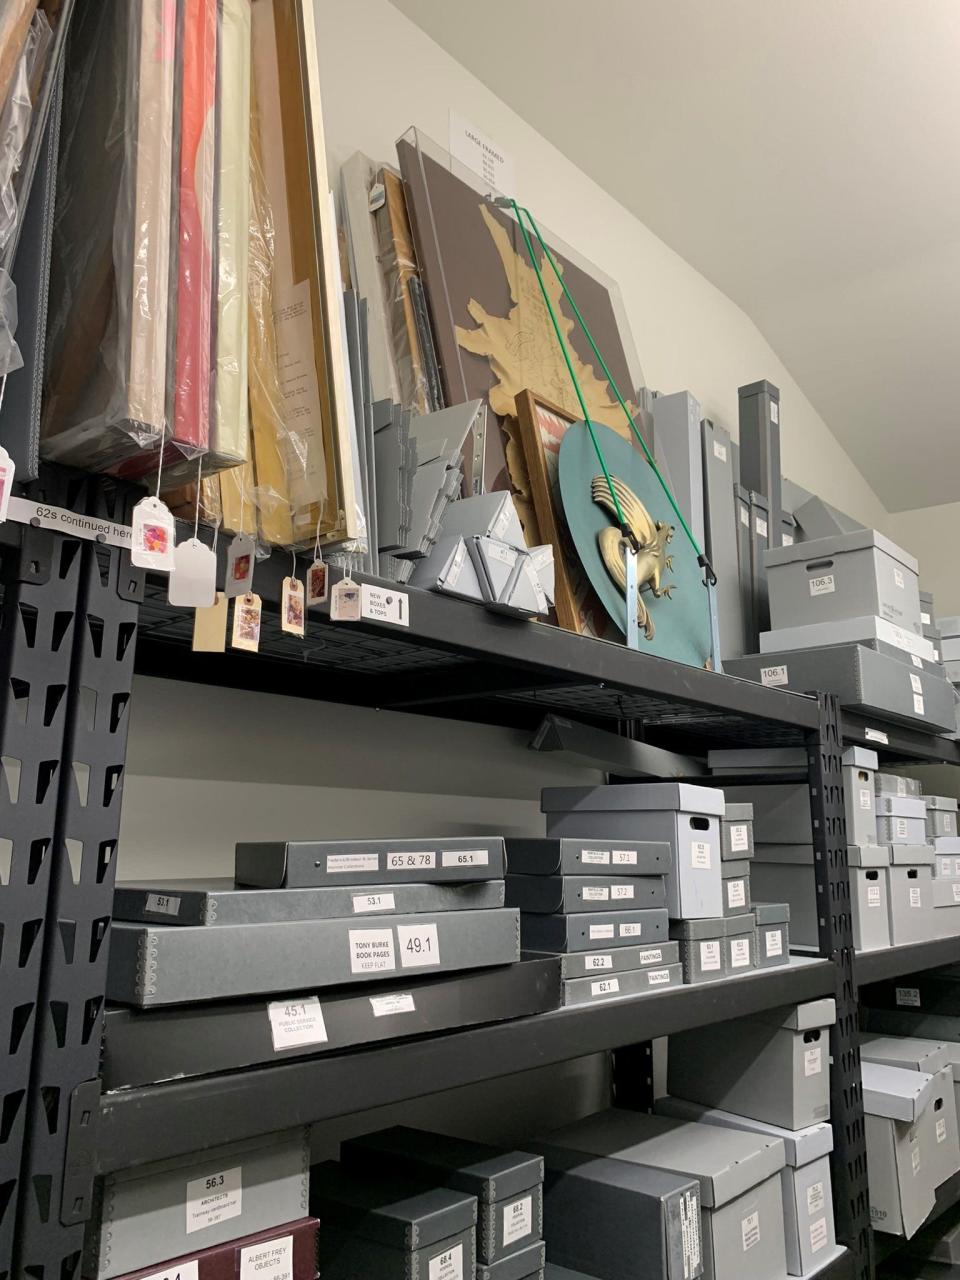 The archival collection at the Palm Springs Historical Society contains various items, including phone books, magazines, photographs, audio recordings and more.